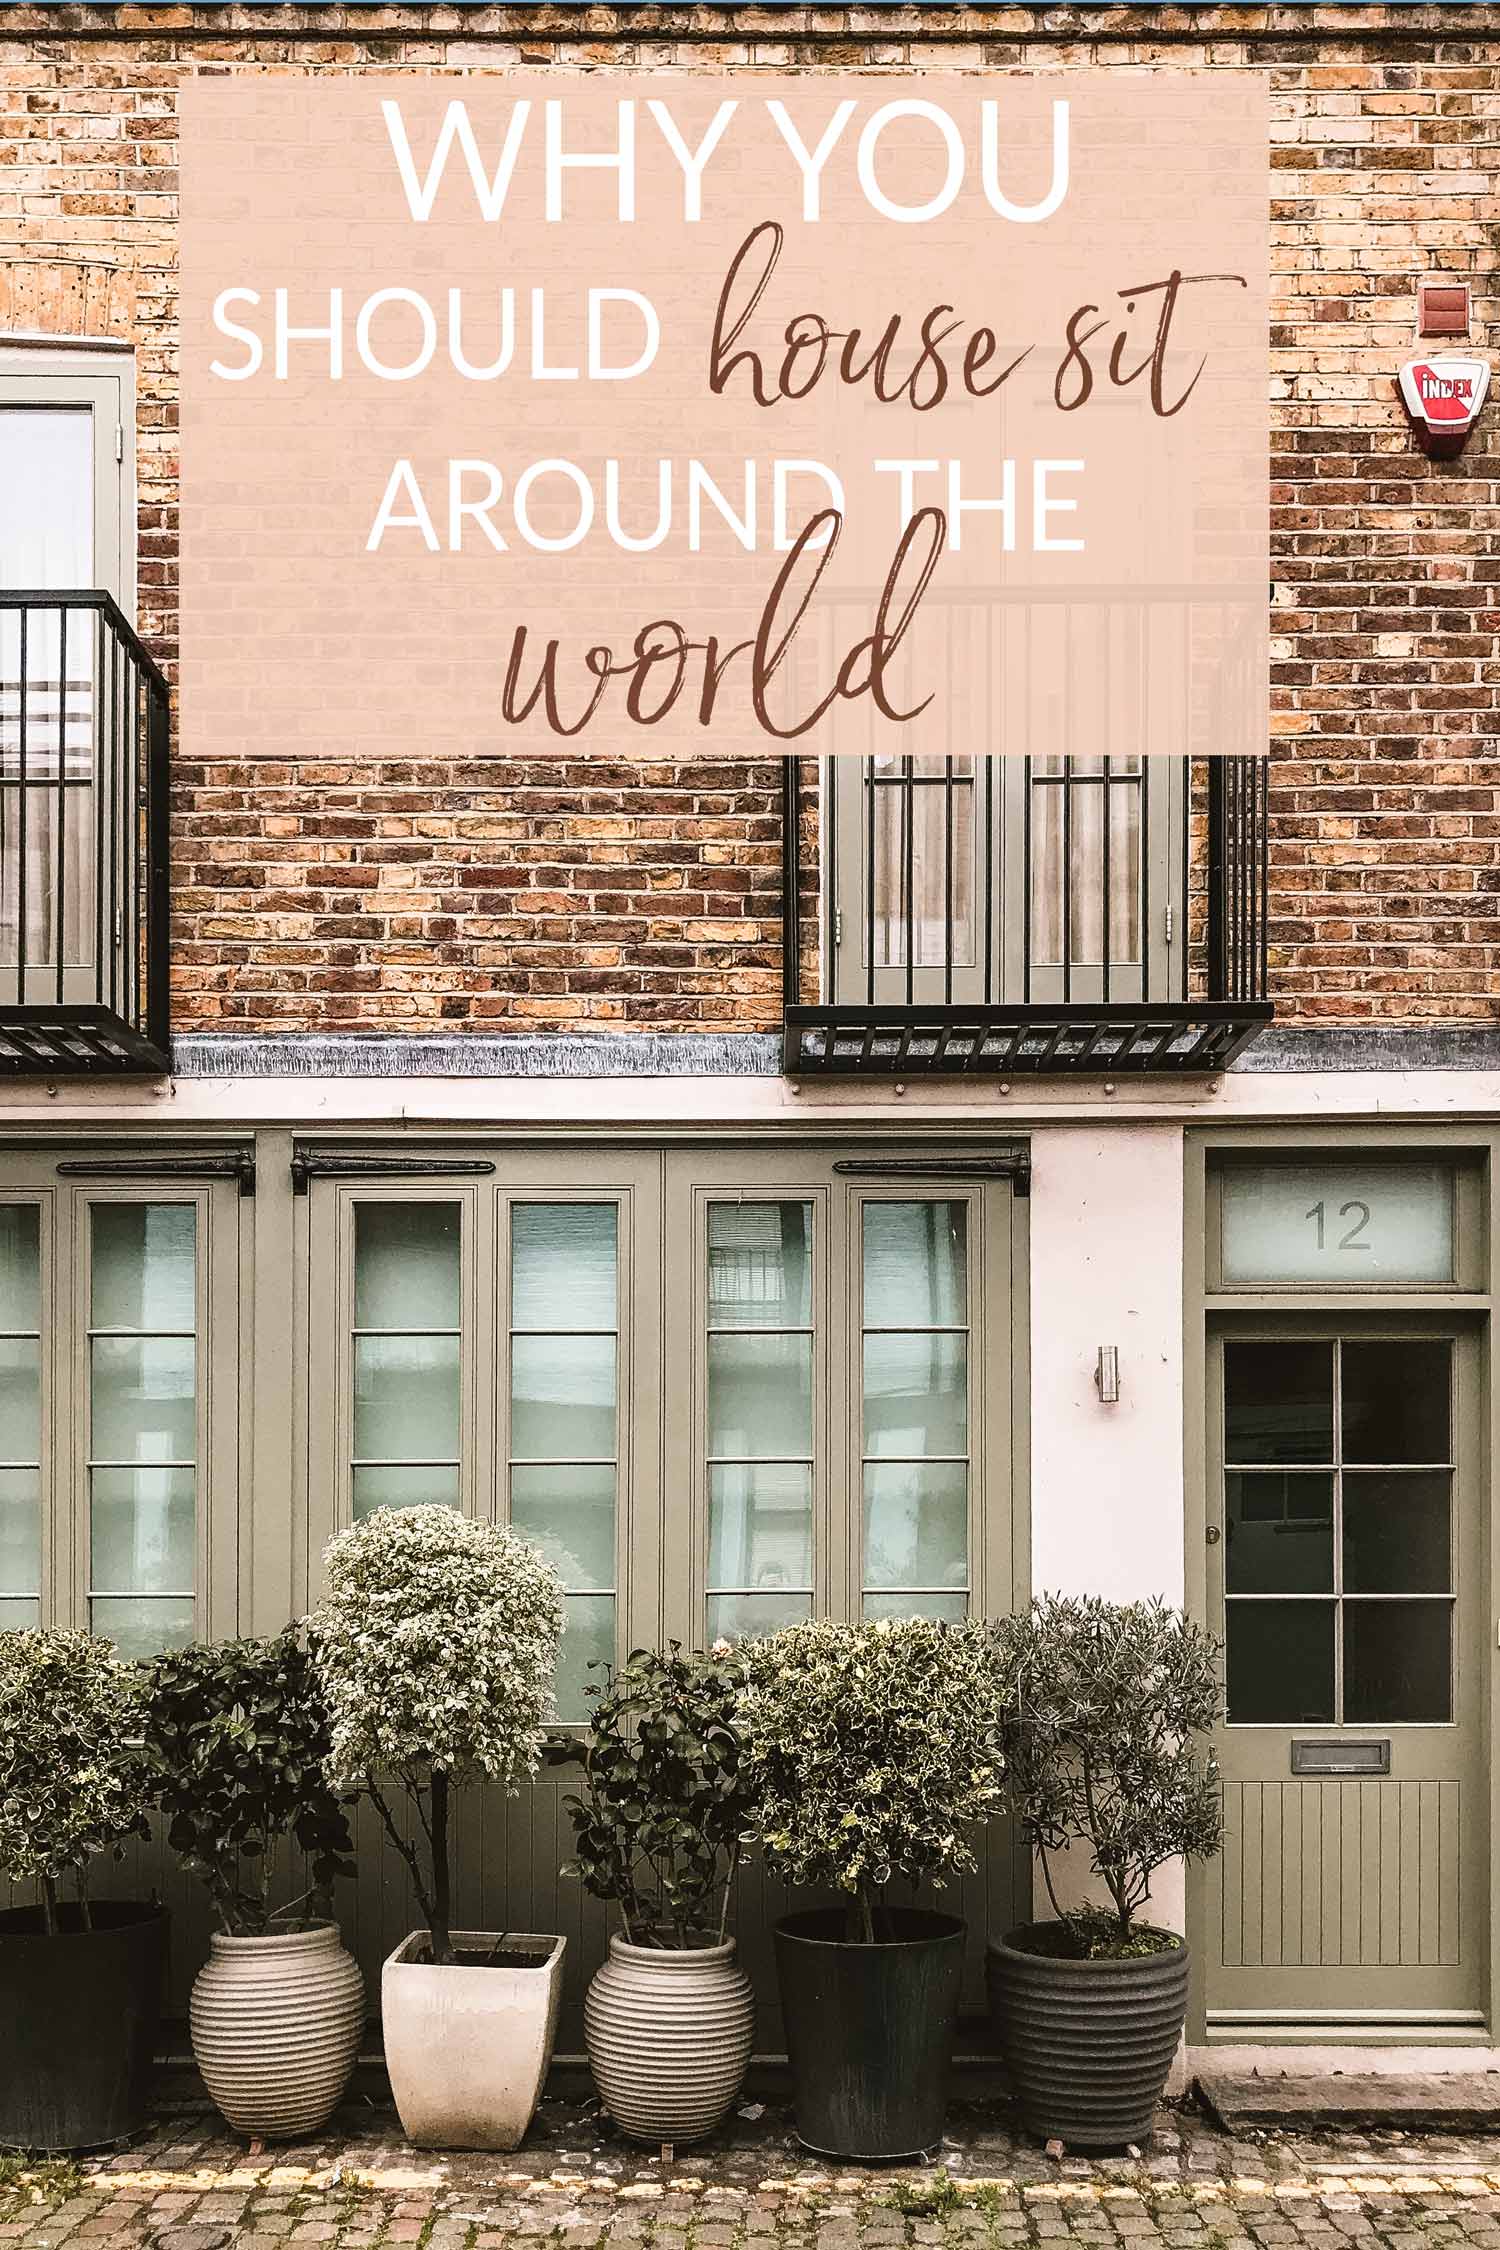 Why You Should House Sit Around the World